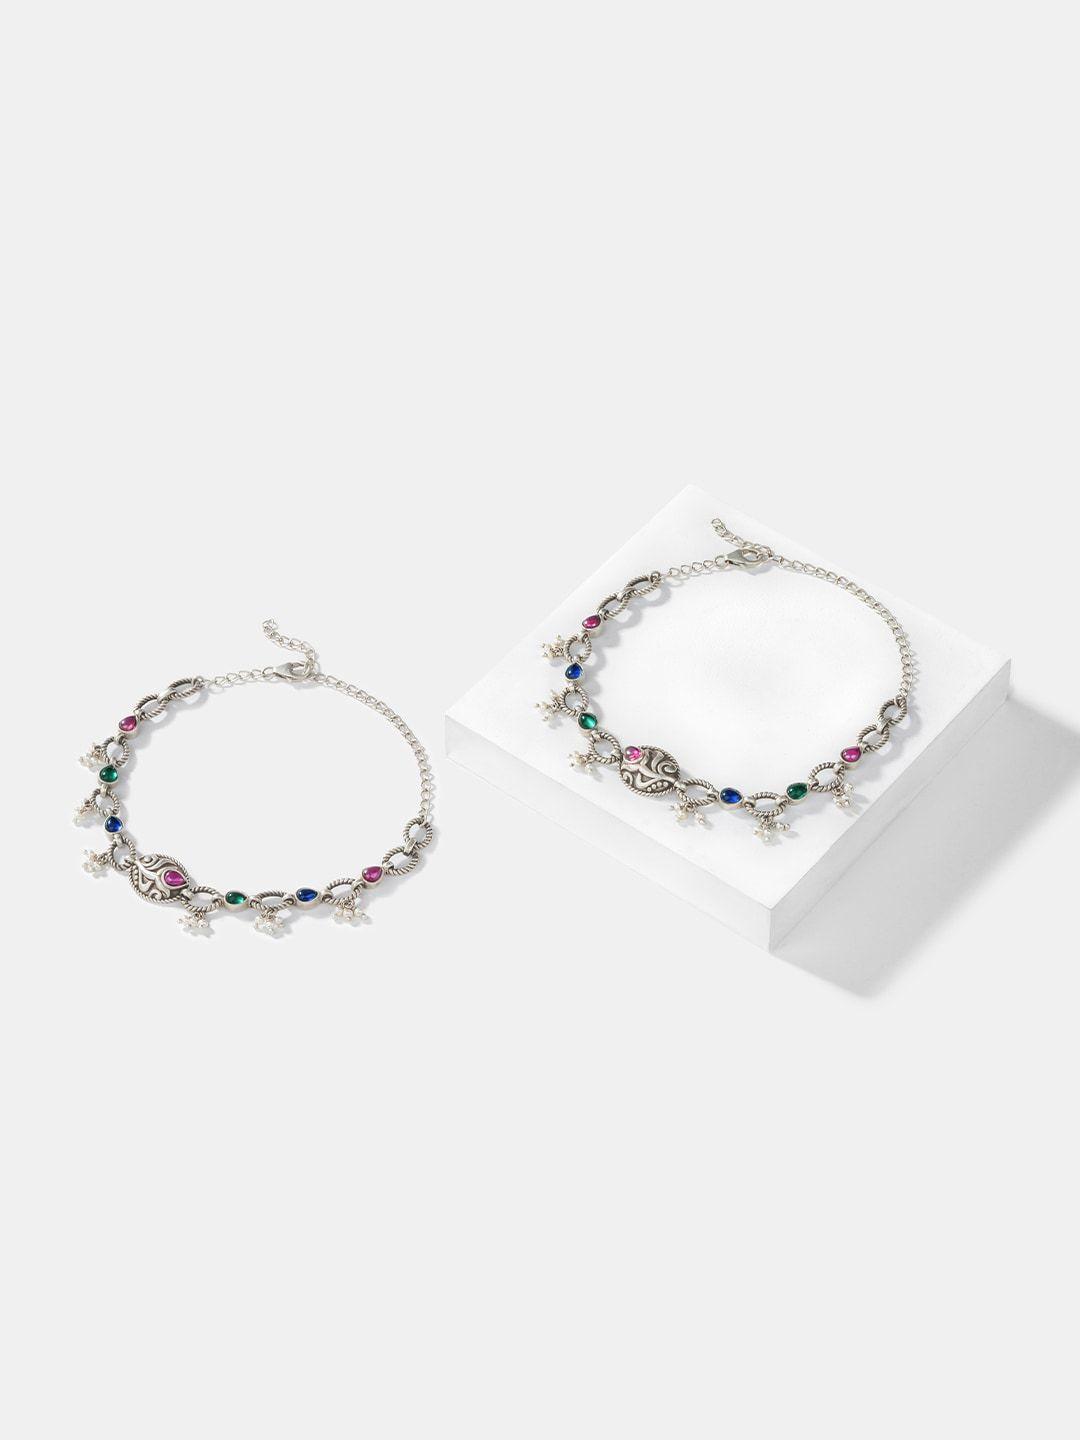 shaya 92.5 sterling silver stone-studded oxidised anklets